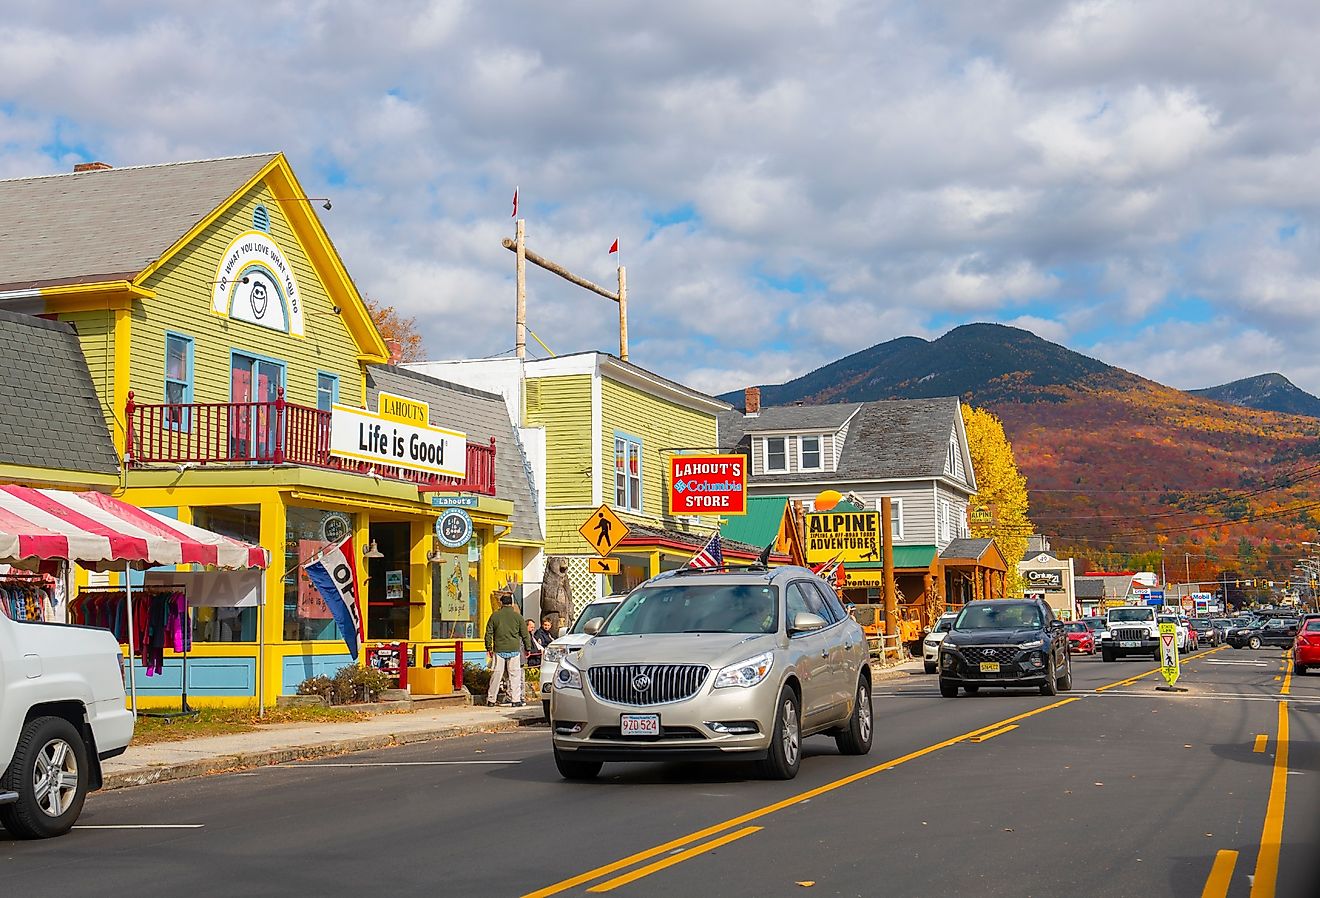 Town center and Little Coolidge Mountain on Kancamagus Highway, Lincoln, New Hampshire. Image credit Wangkun Jia via Shutterstock